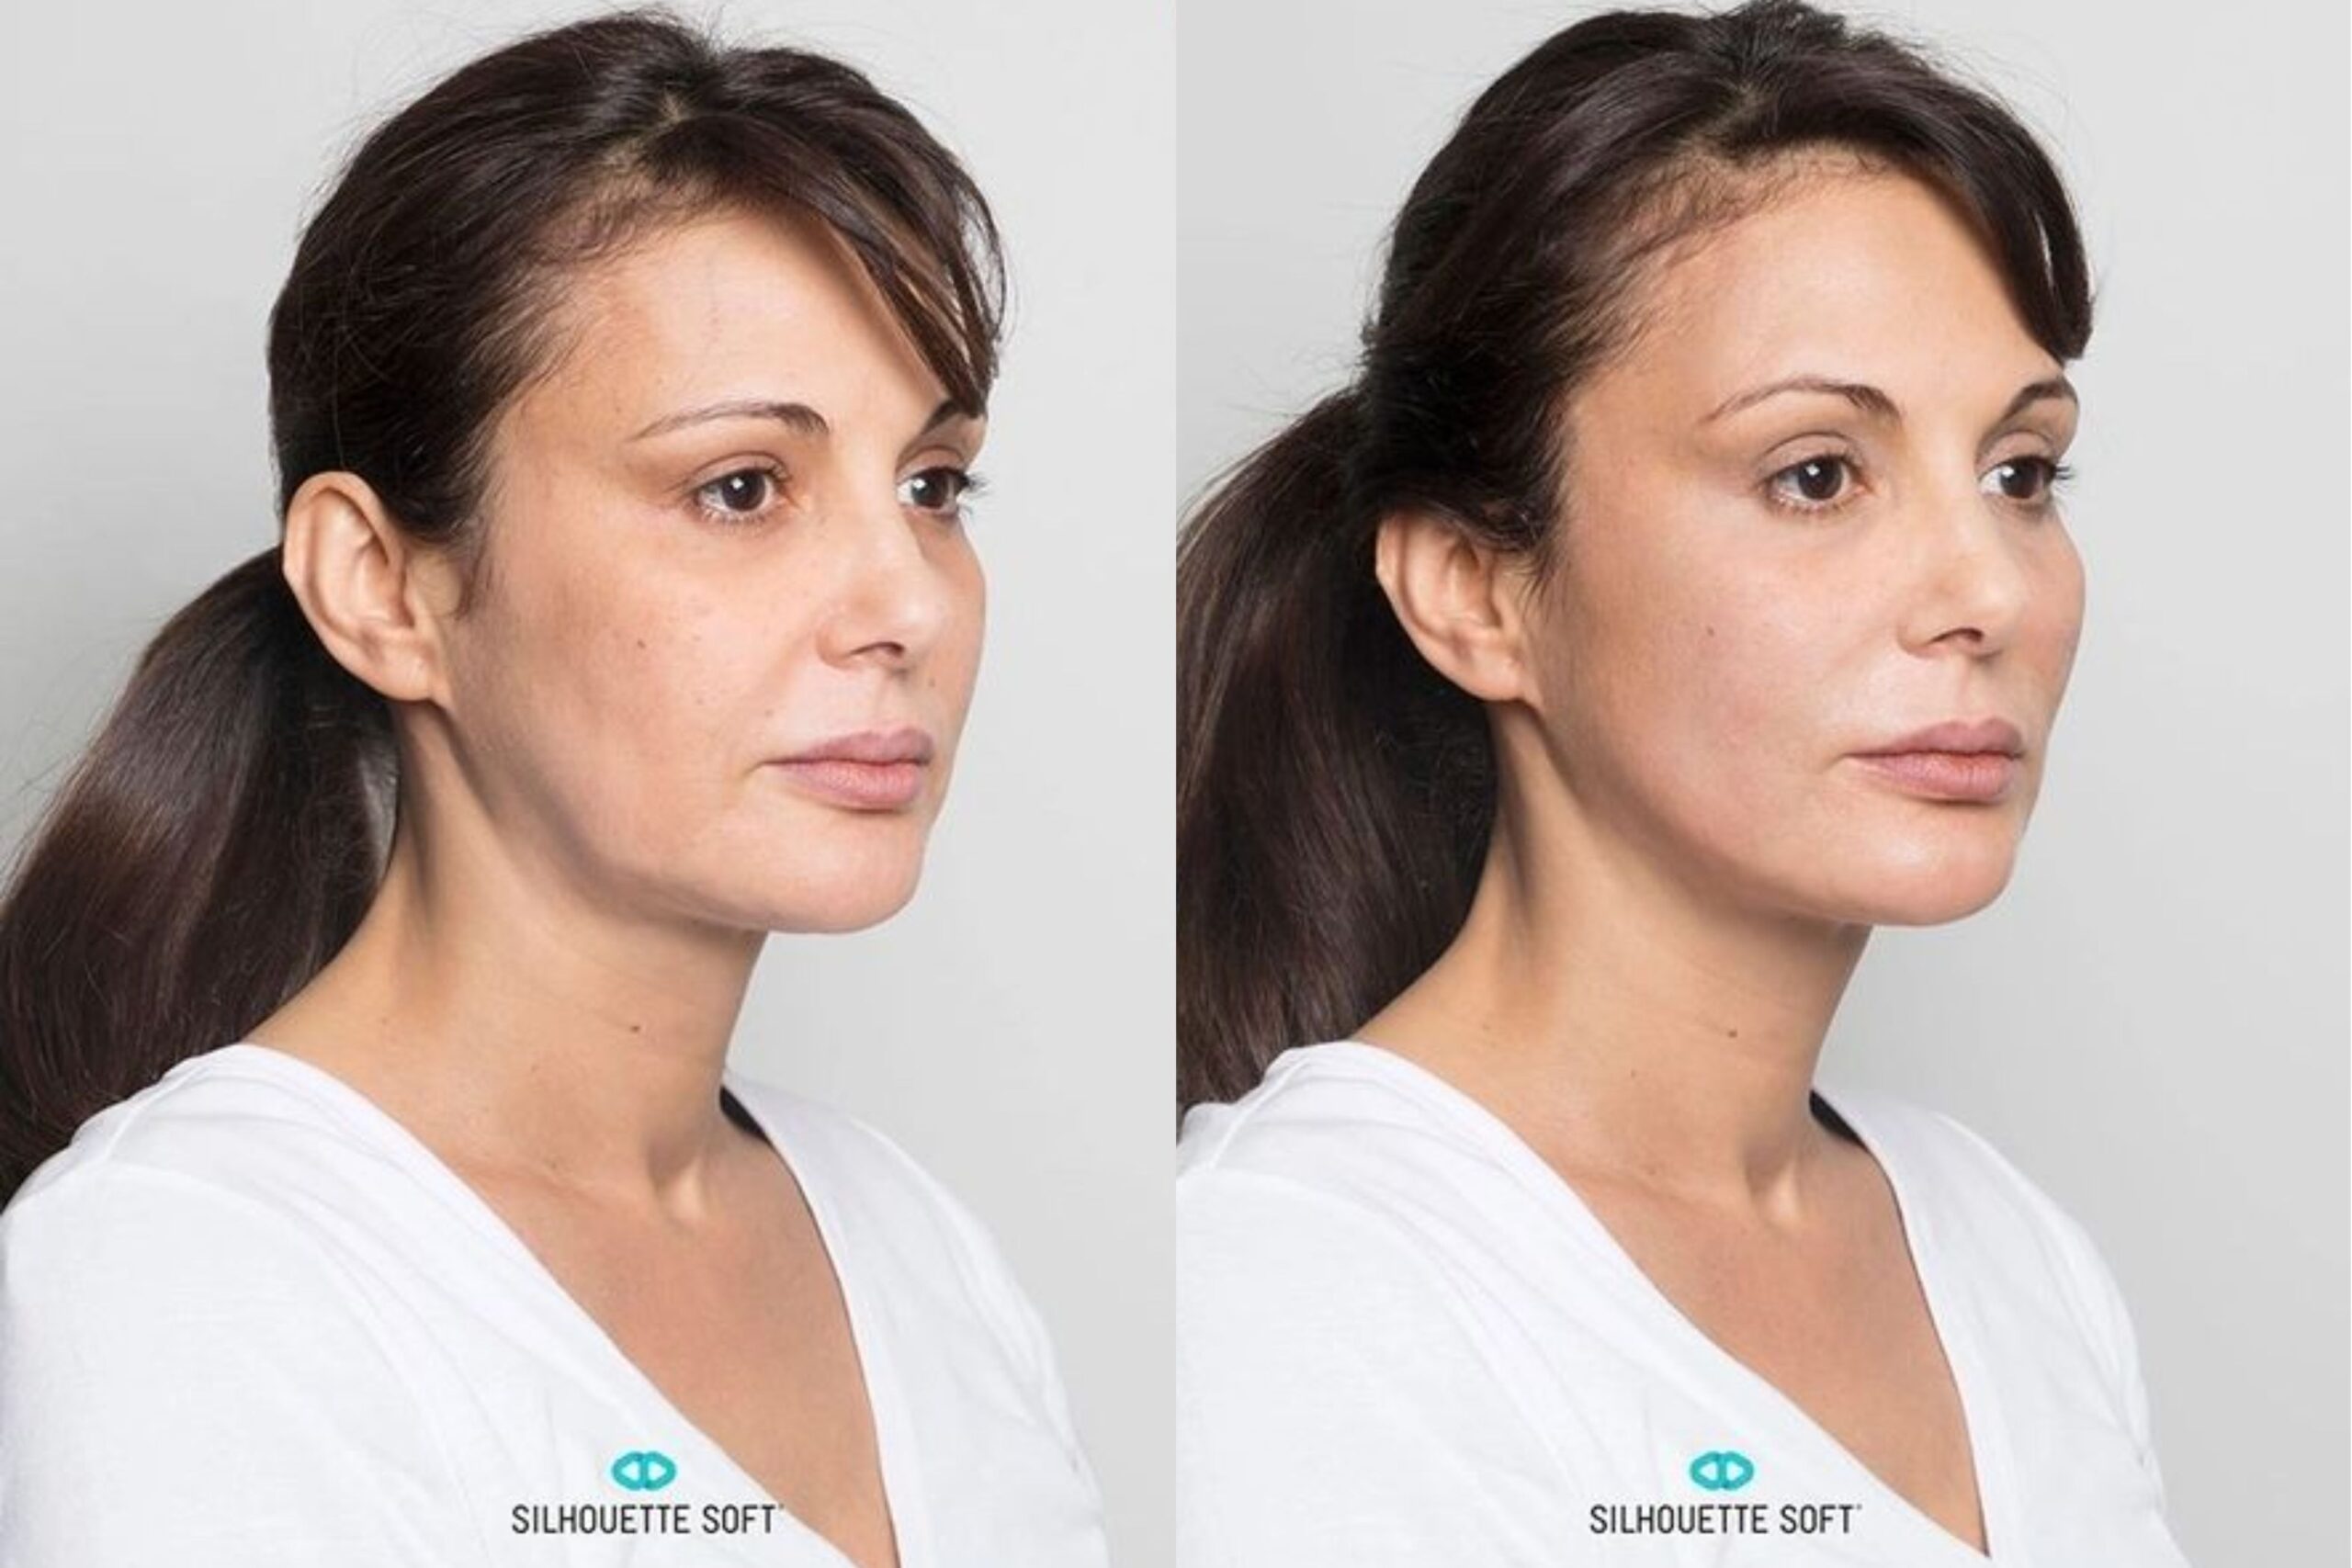 Silhouette Soft Thread Lifts: Before and After Image